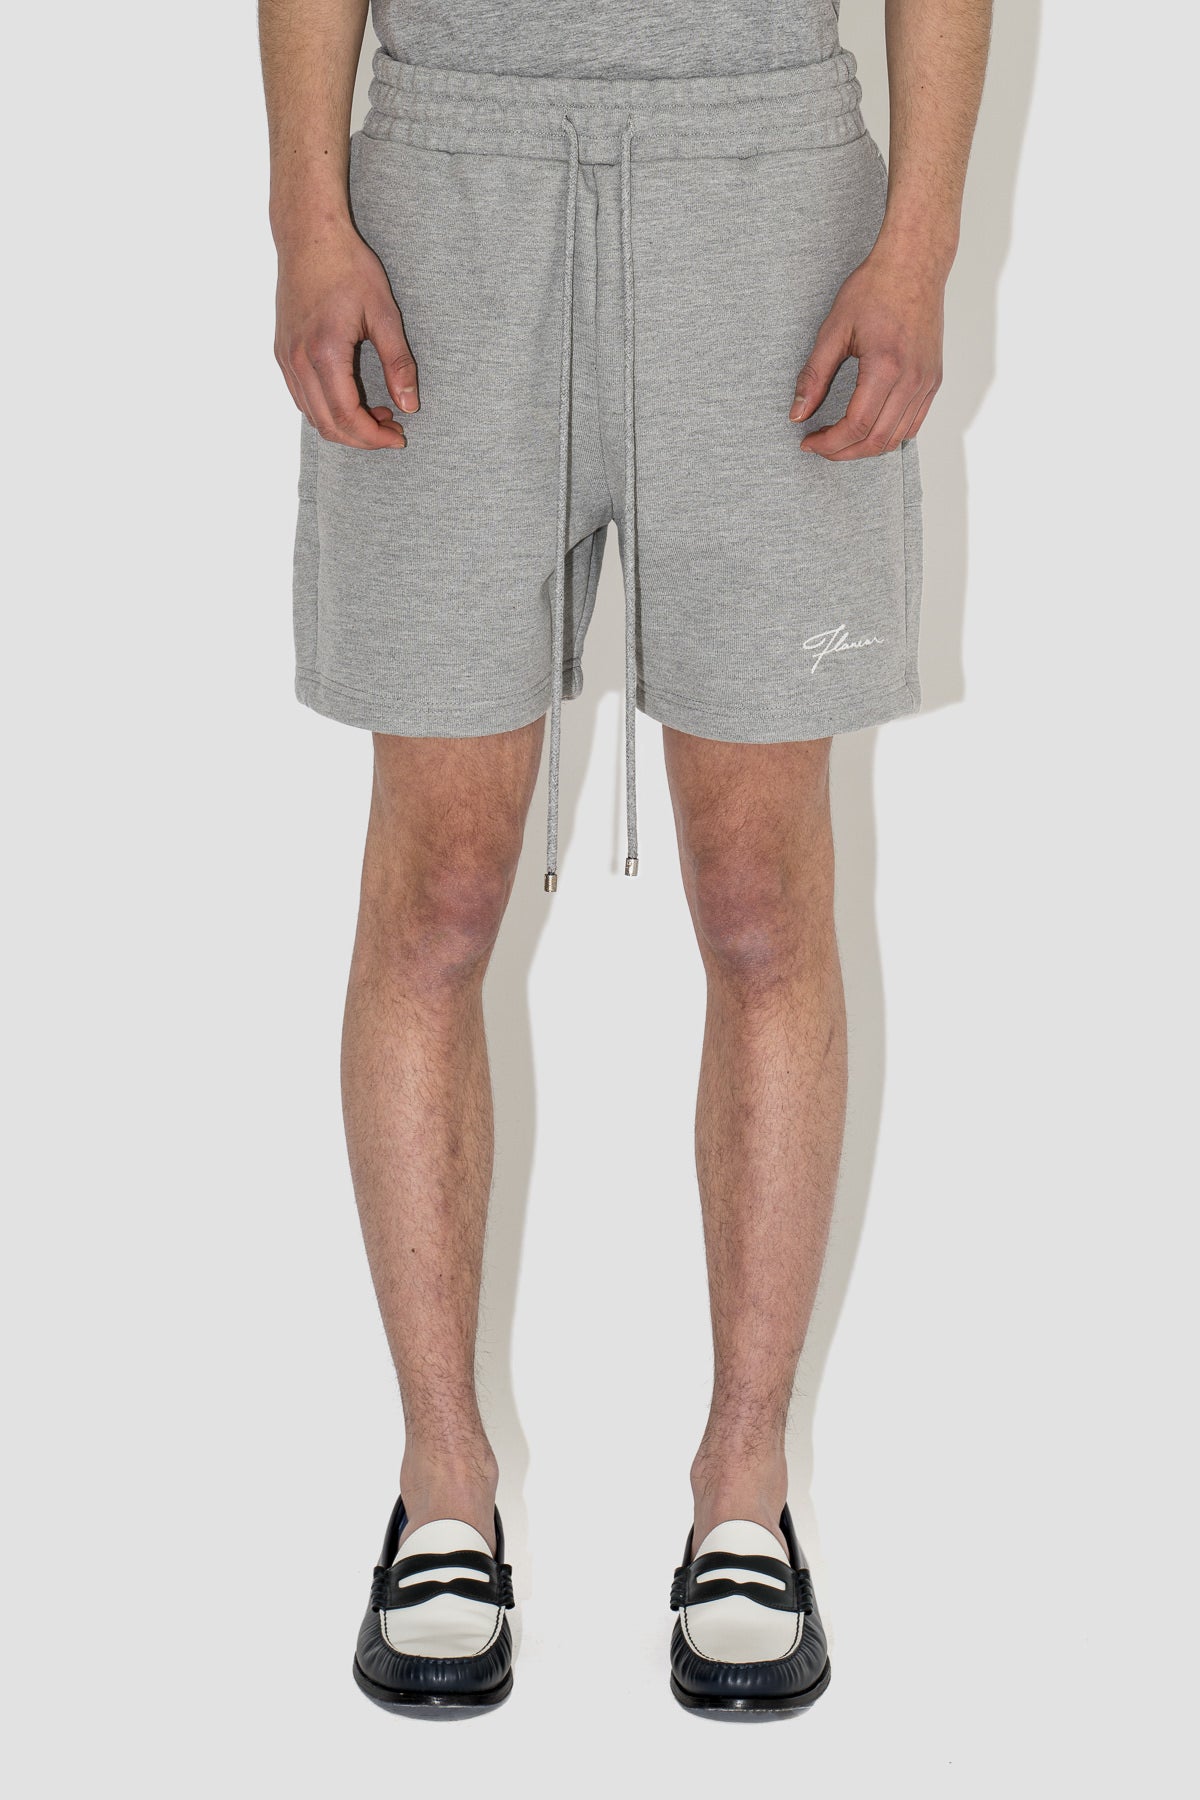 Embroidered Signature Shorts in Heather Grey